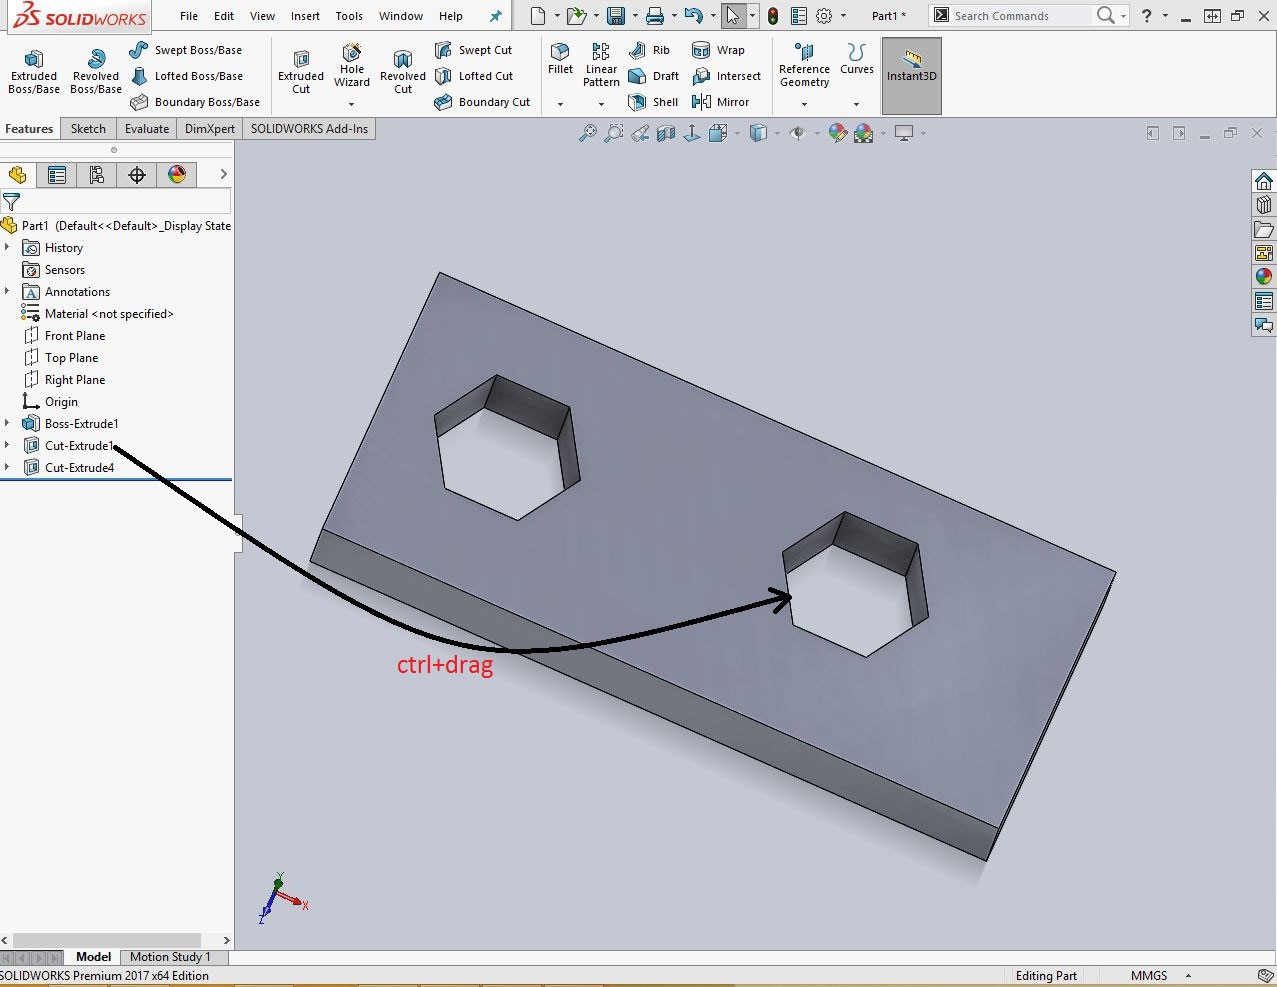 How to Use Copy and Paste Sketch Feature in SOLIDWORKS